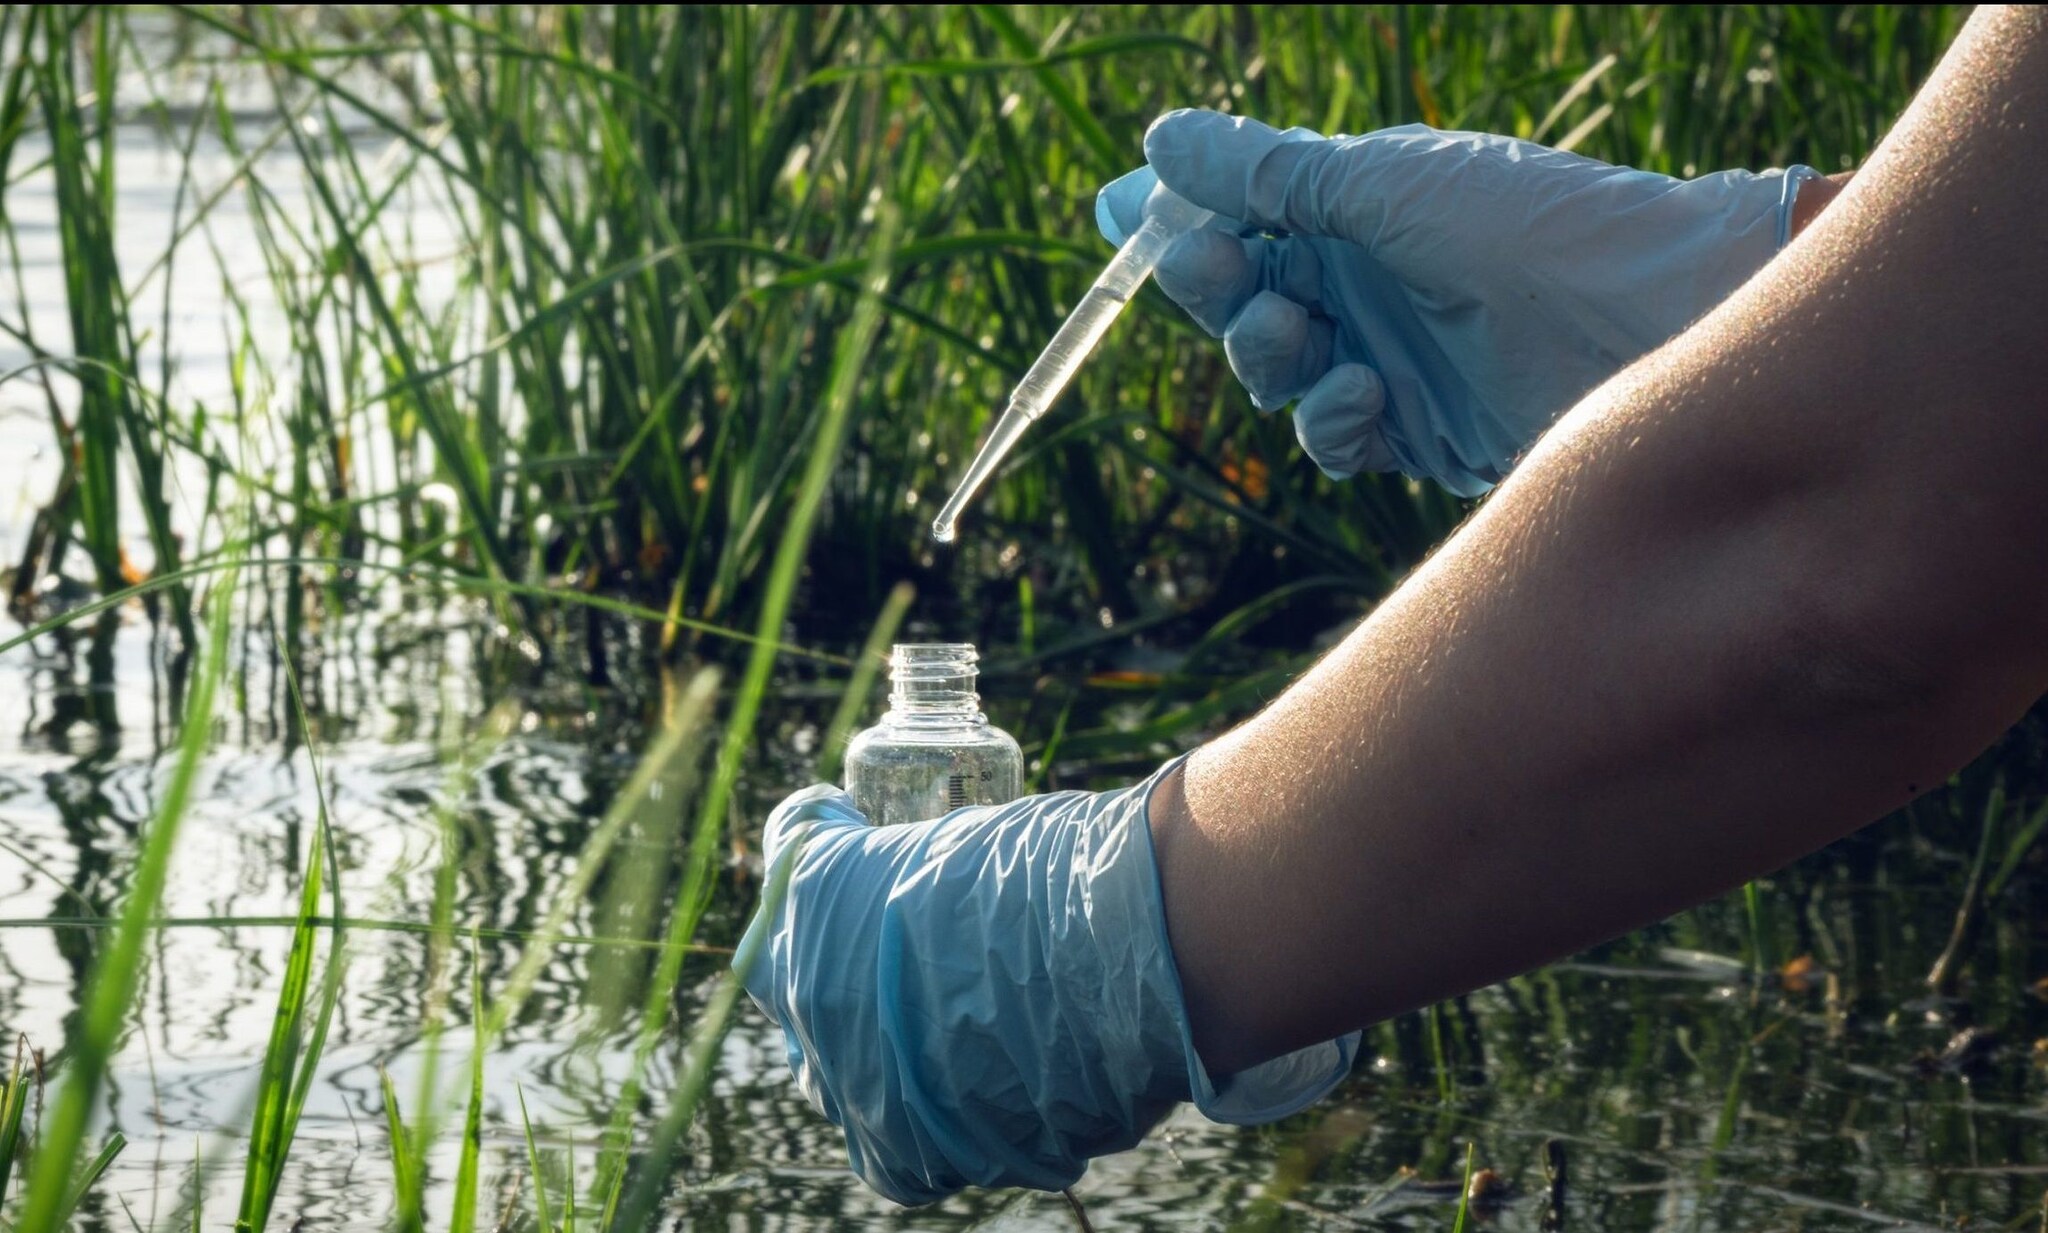 Gloved hands extract water from a marsh using scientific tools.